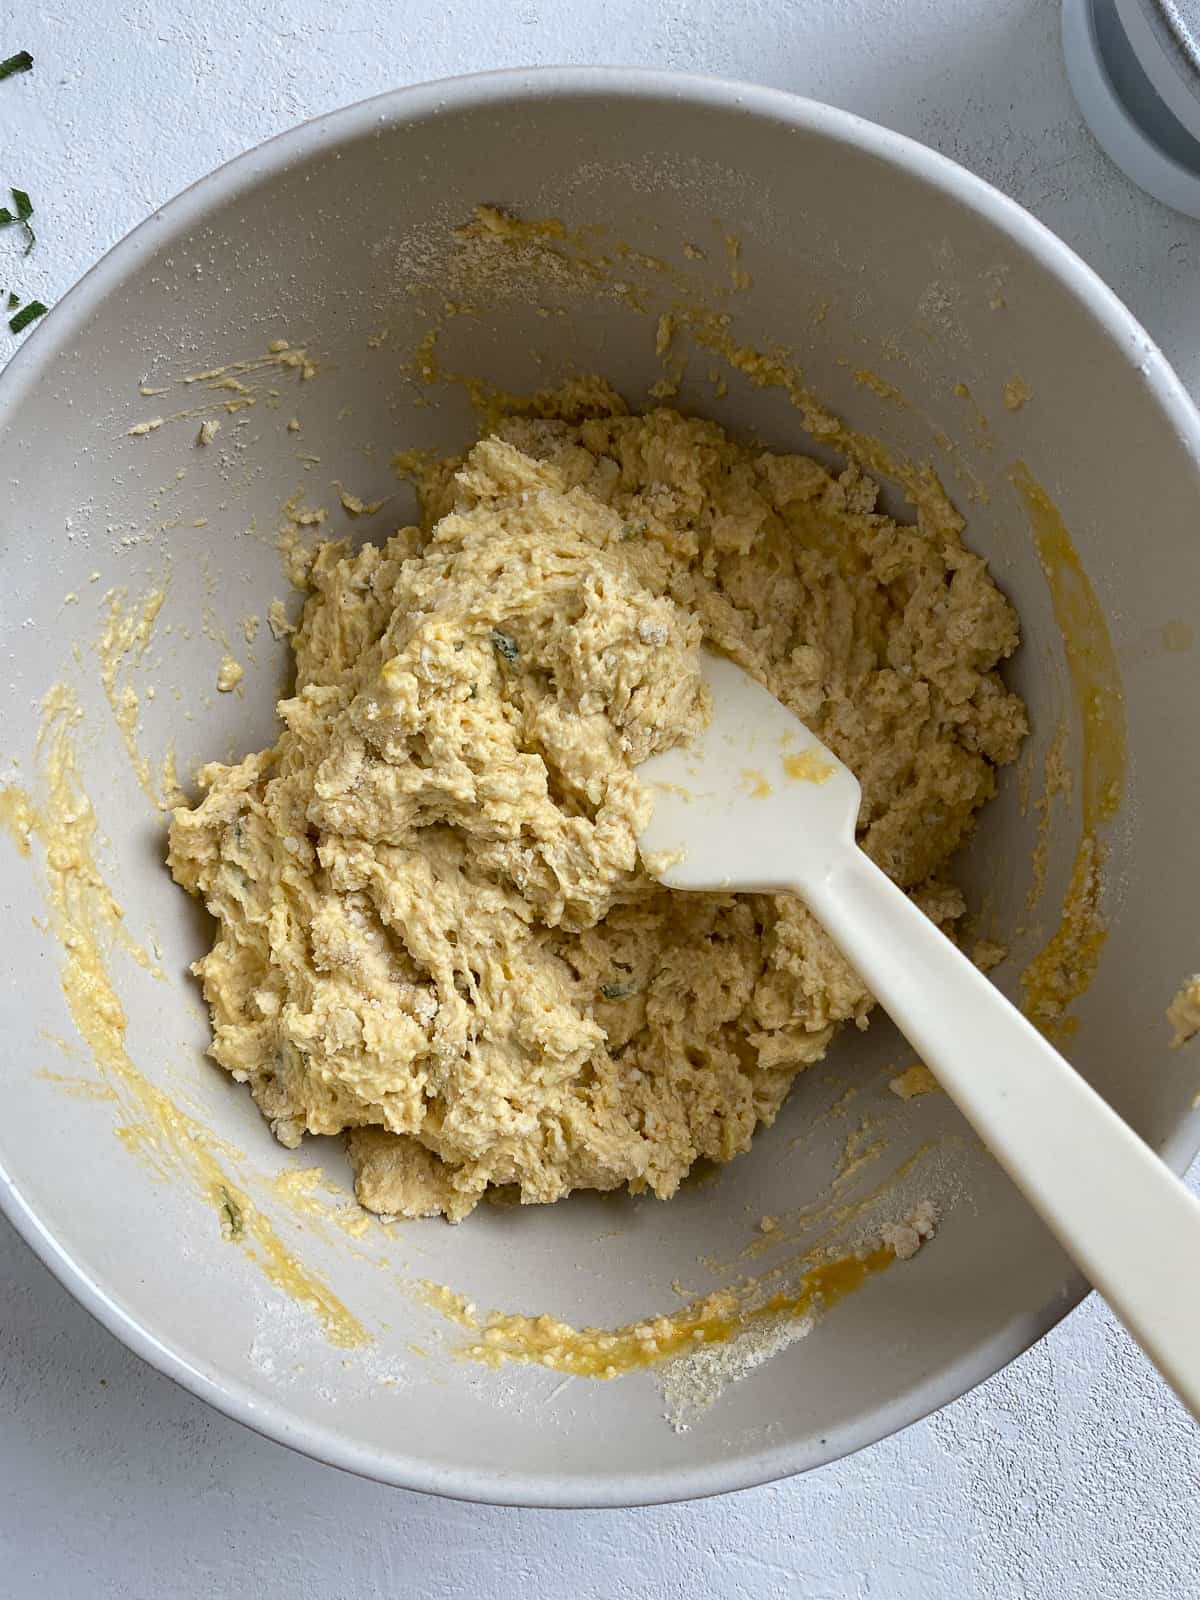 process of mixing ingredients together for Butternut Squash Sage Biscuits in a bowl